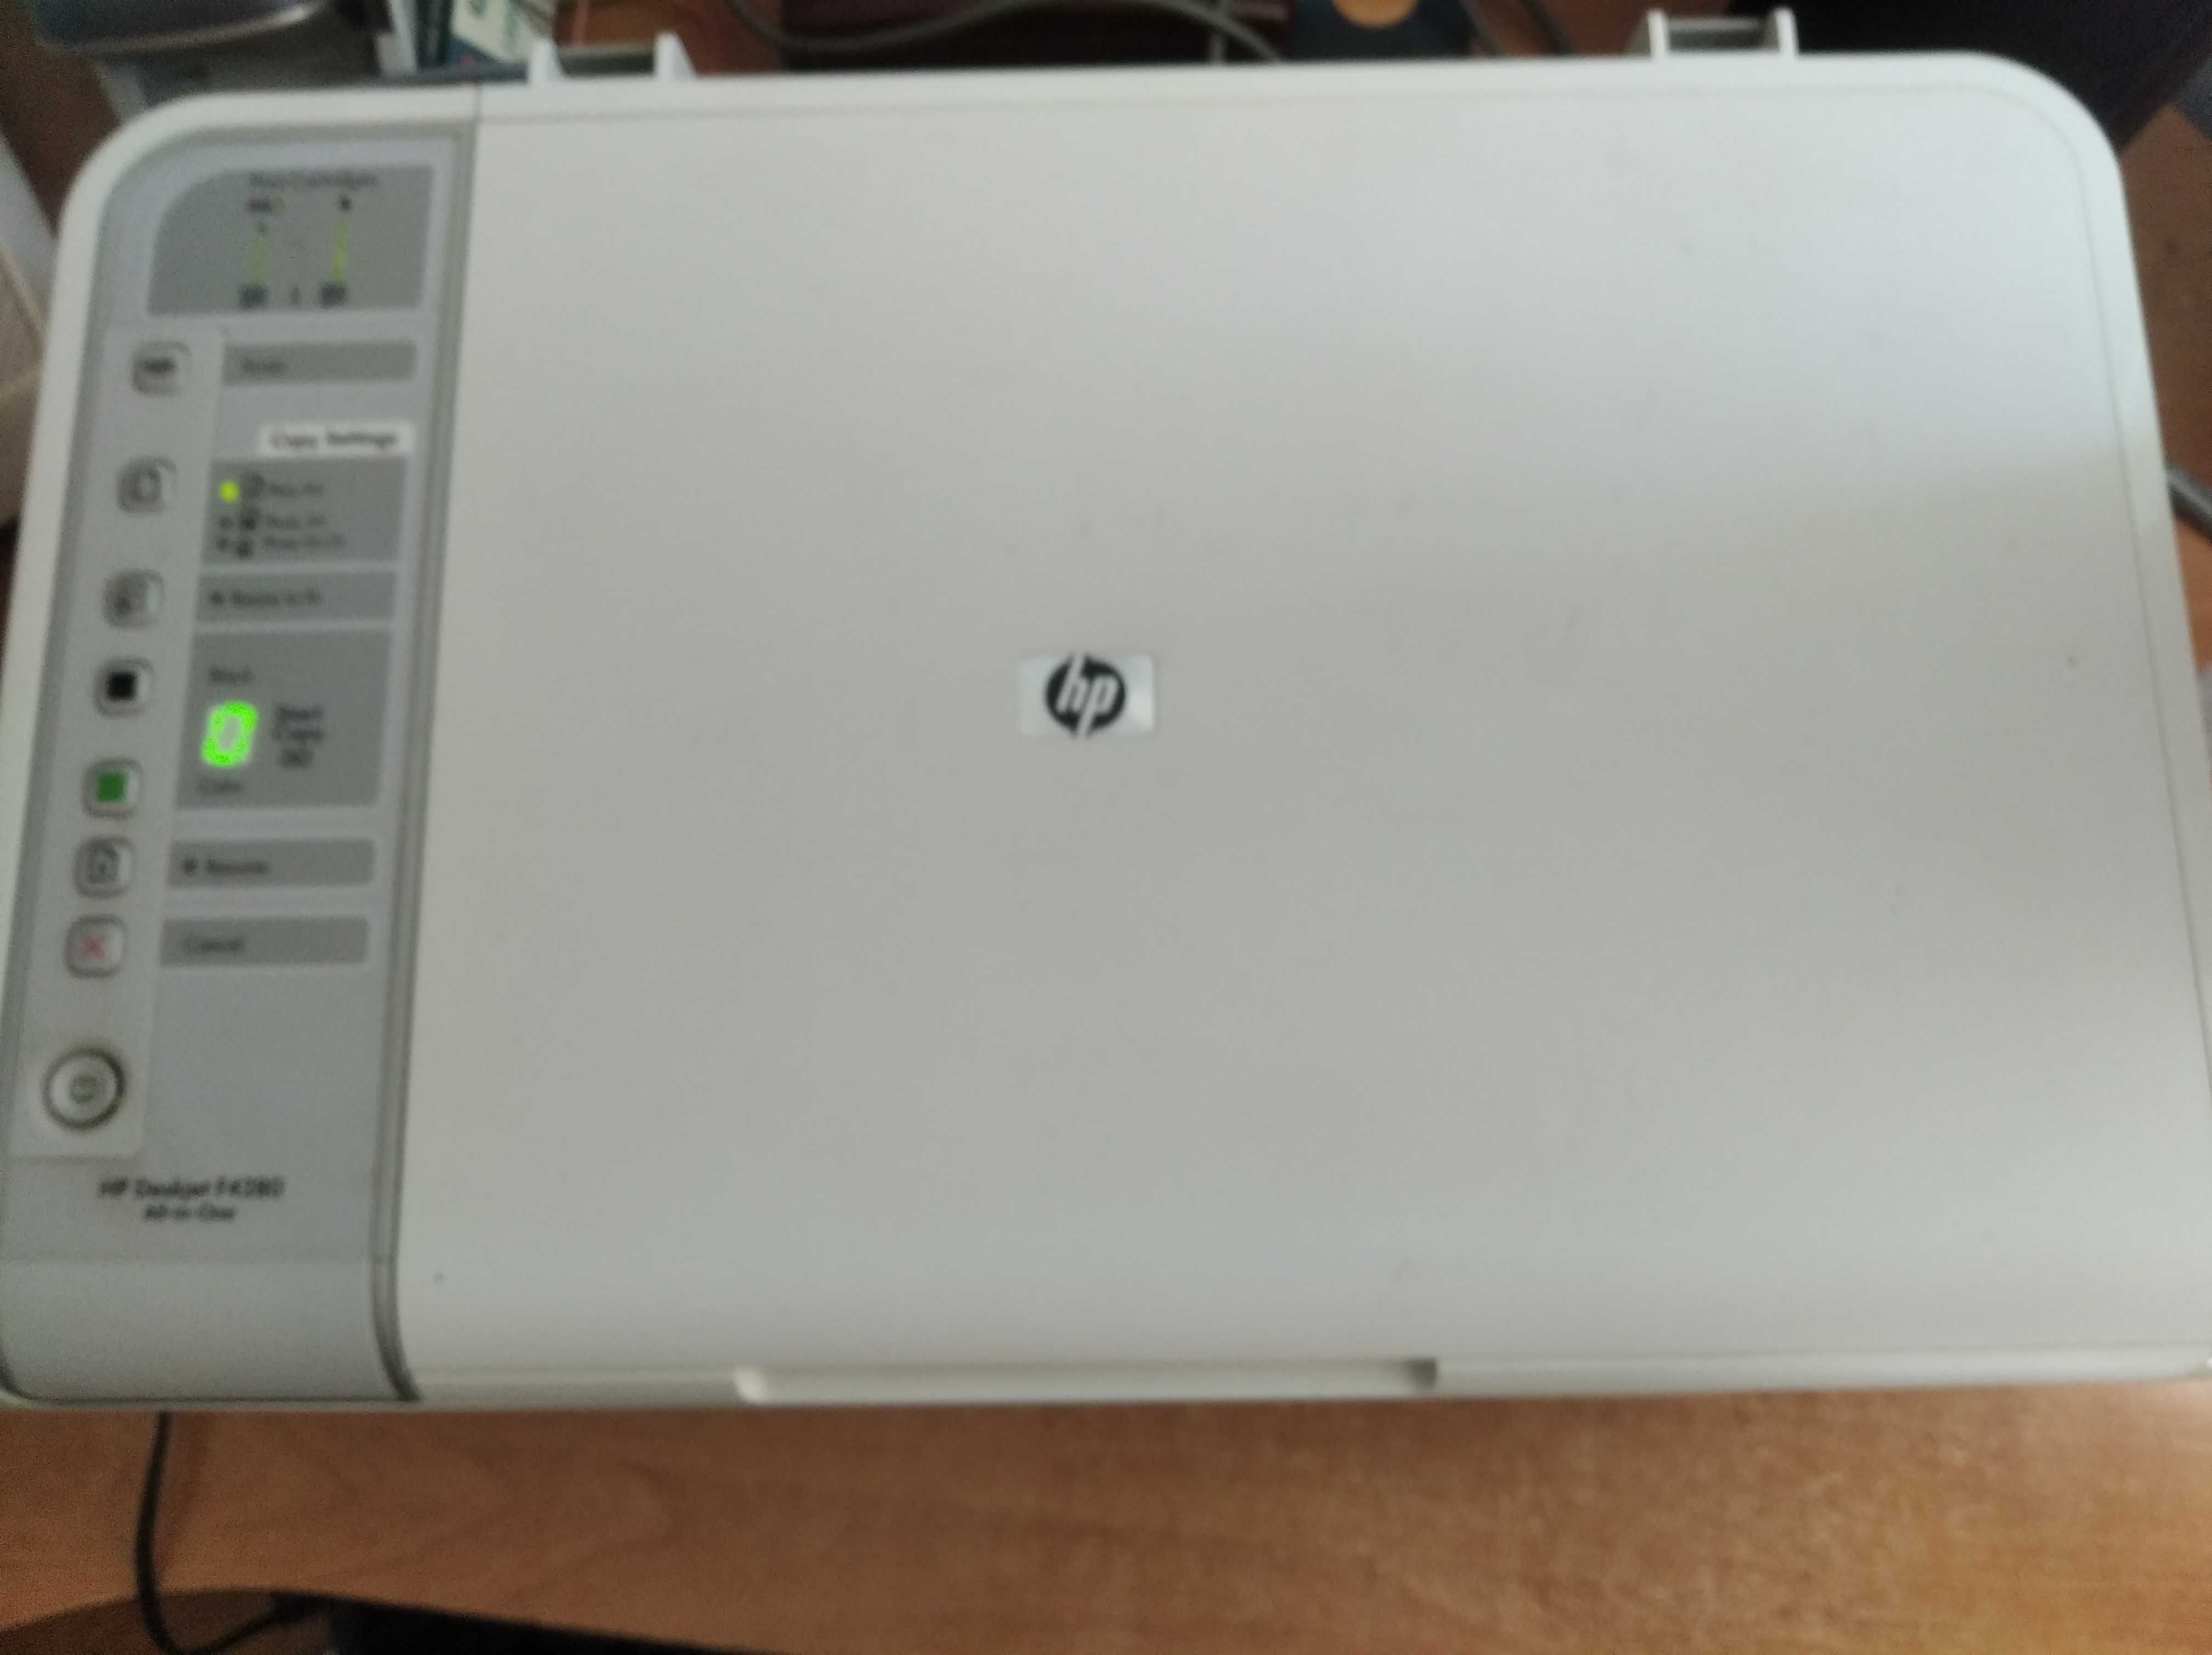 HP F4280 all-in-one